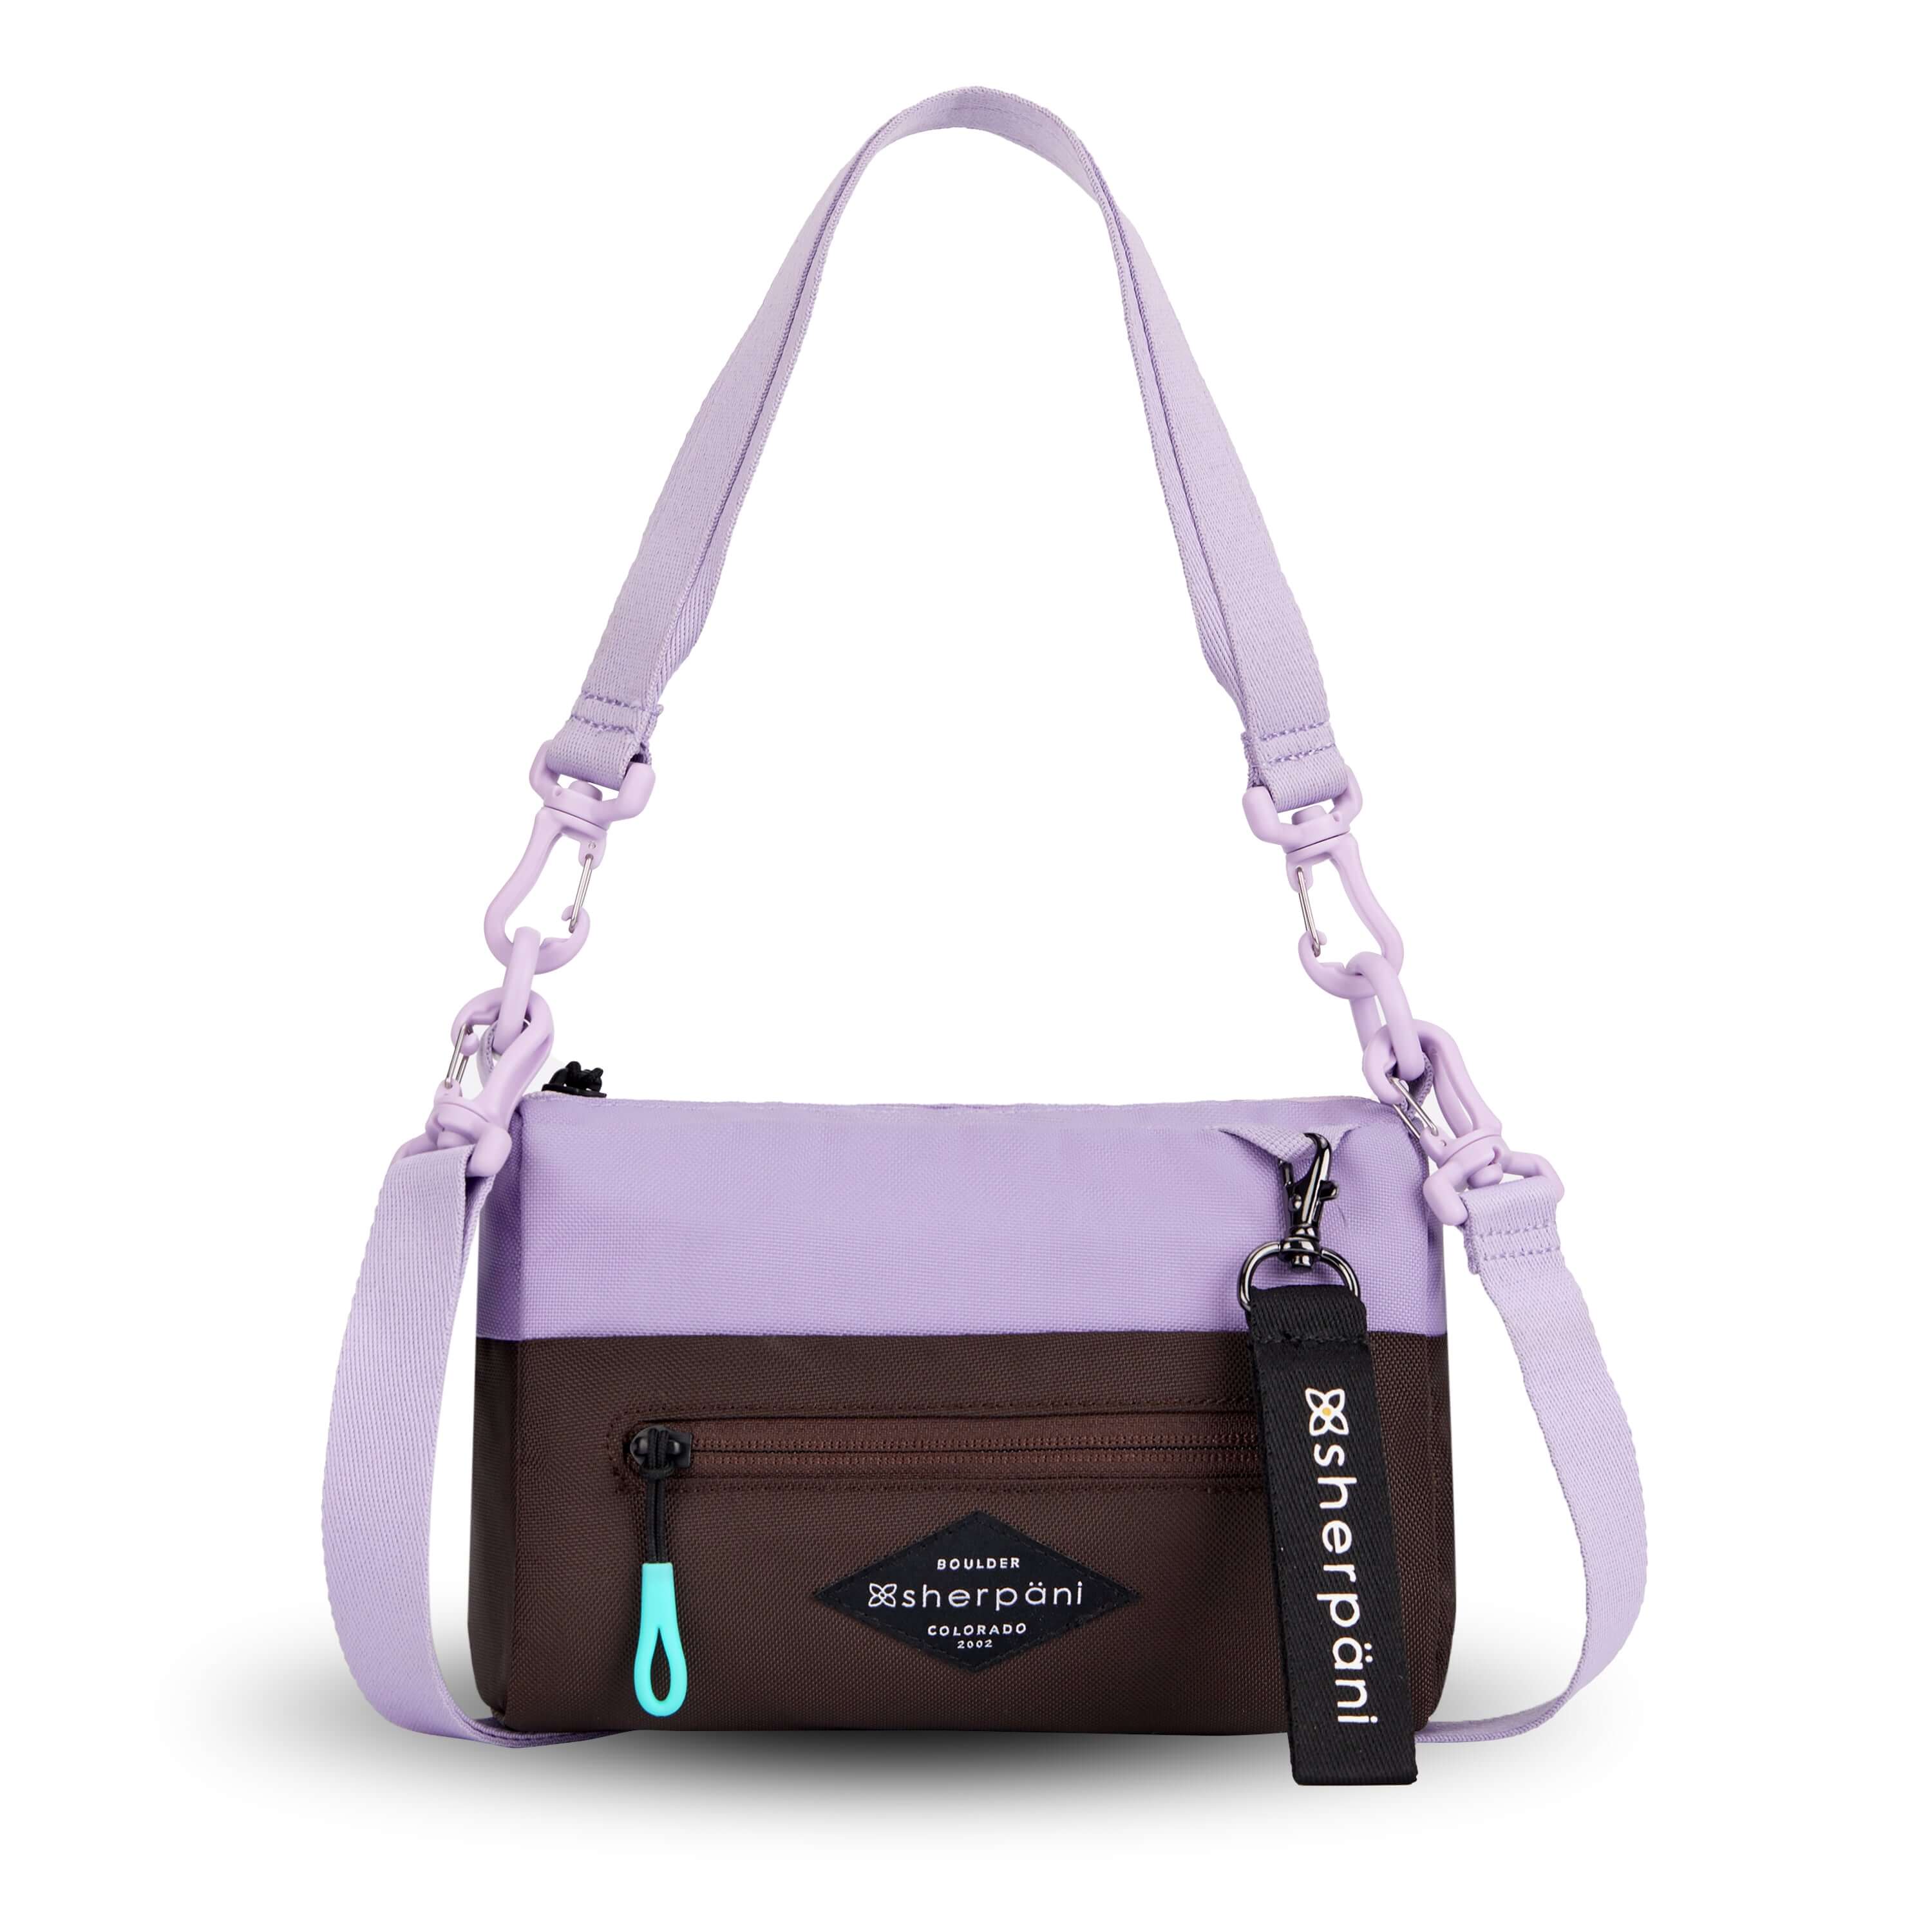 Flat front view of Sherpani's purse, the Skye in Lavender. It is two-toned, the top half of the bag is lavender and the bottom half of the bag is brown. There is an external zipper compartment with an easy-pull zipper accented in aqua. There is a branded Sherpani keychain clipped to the upper right corner. The bag has a detachable short strap and a longer detachable/adjustable crossbody strap. 